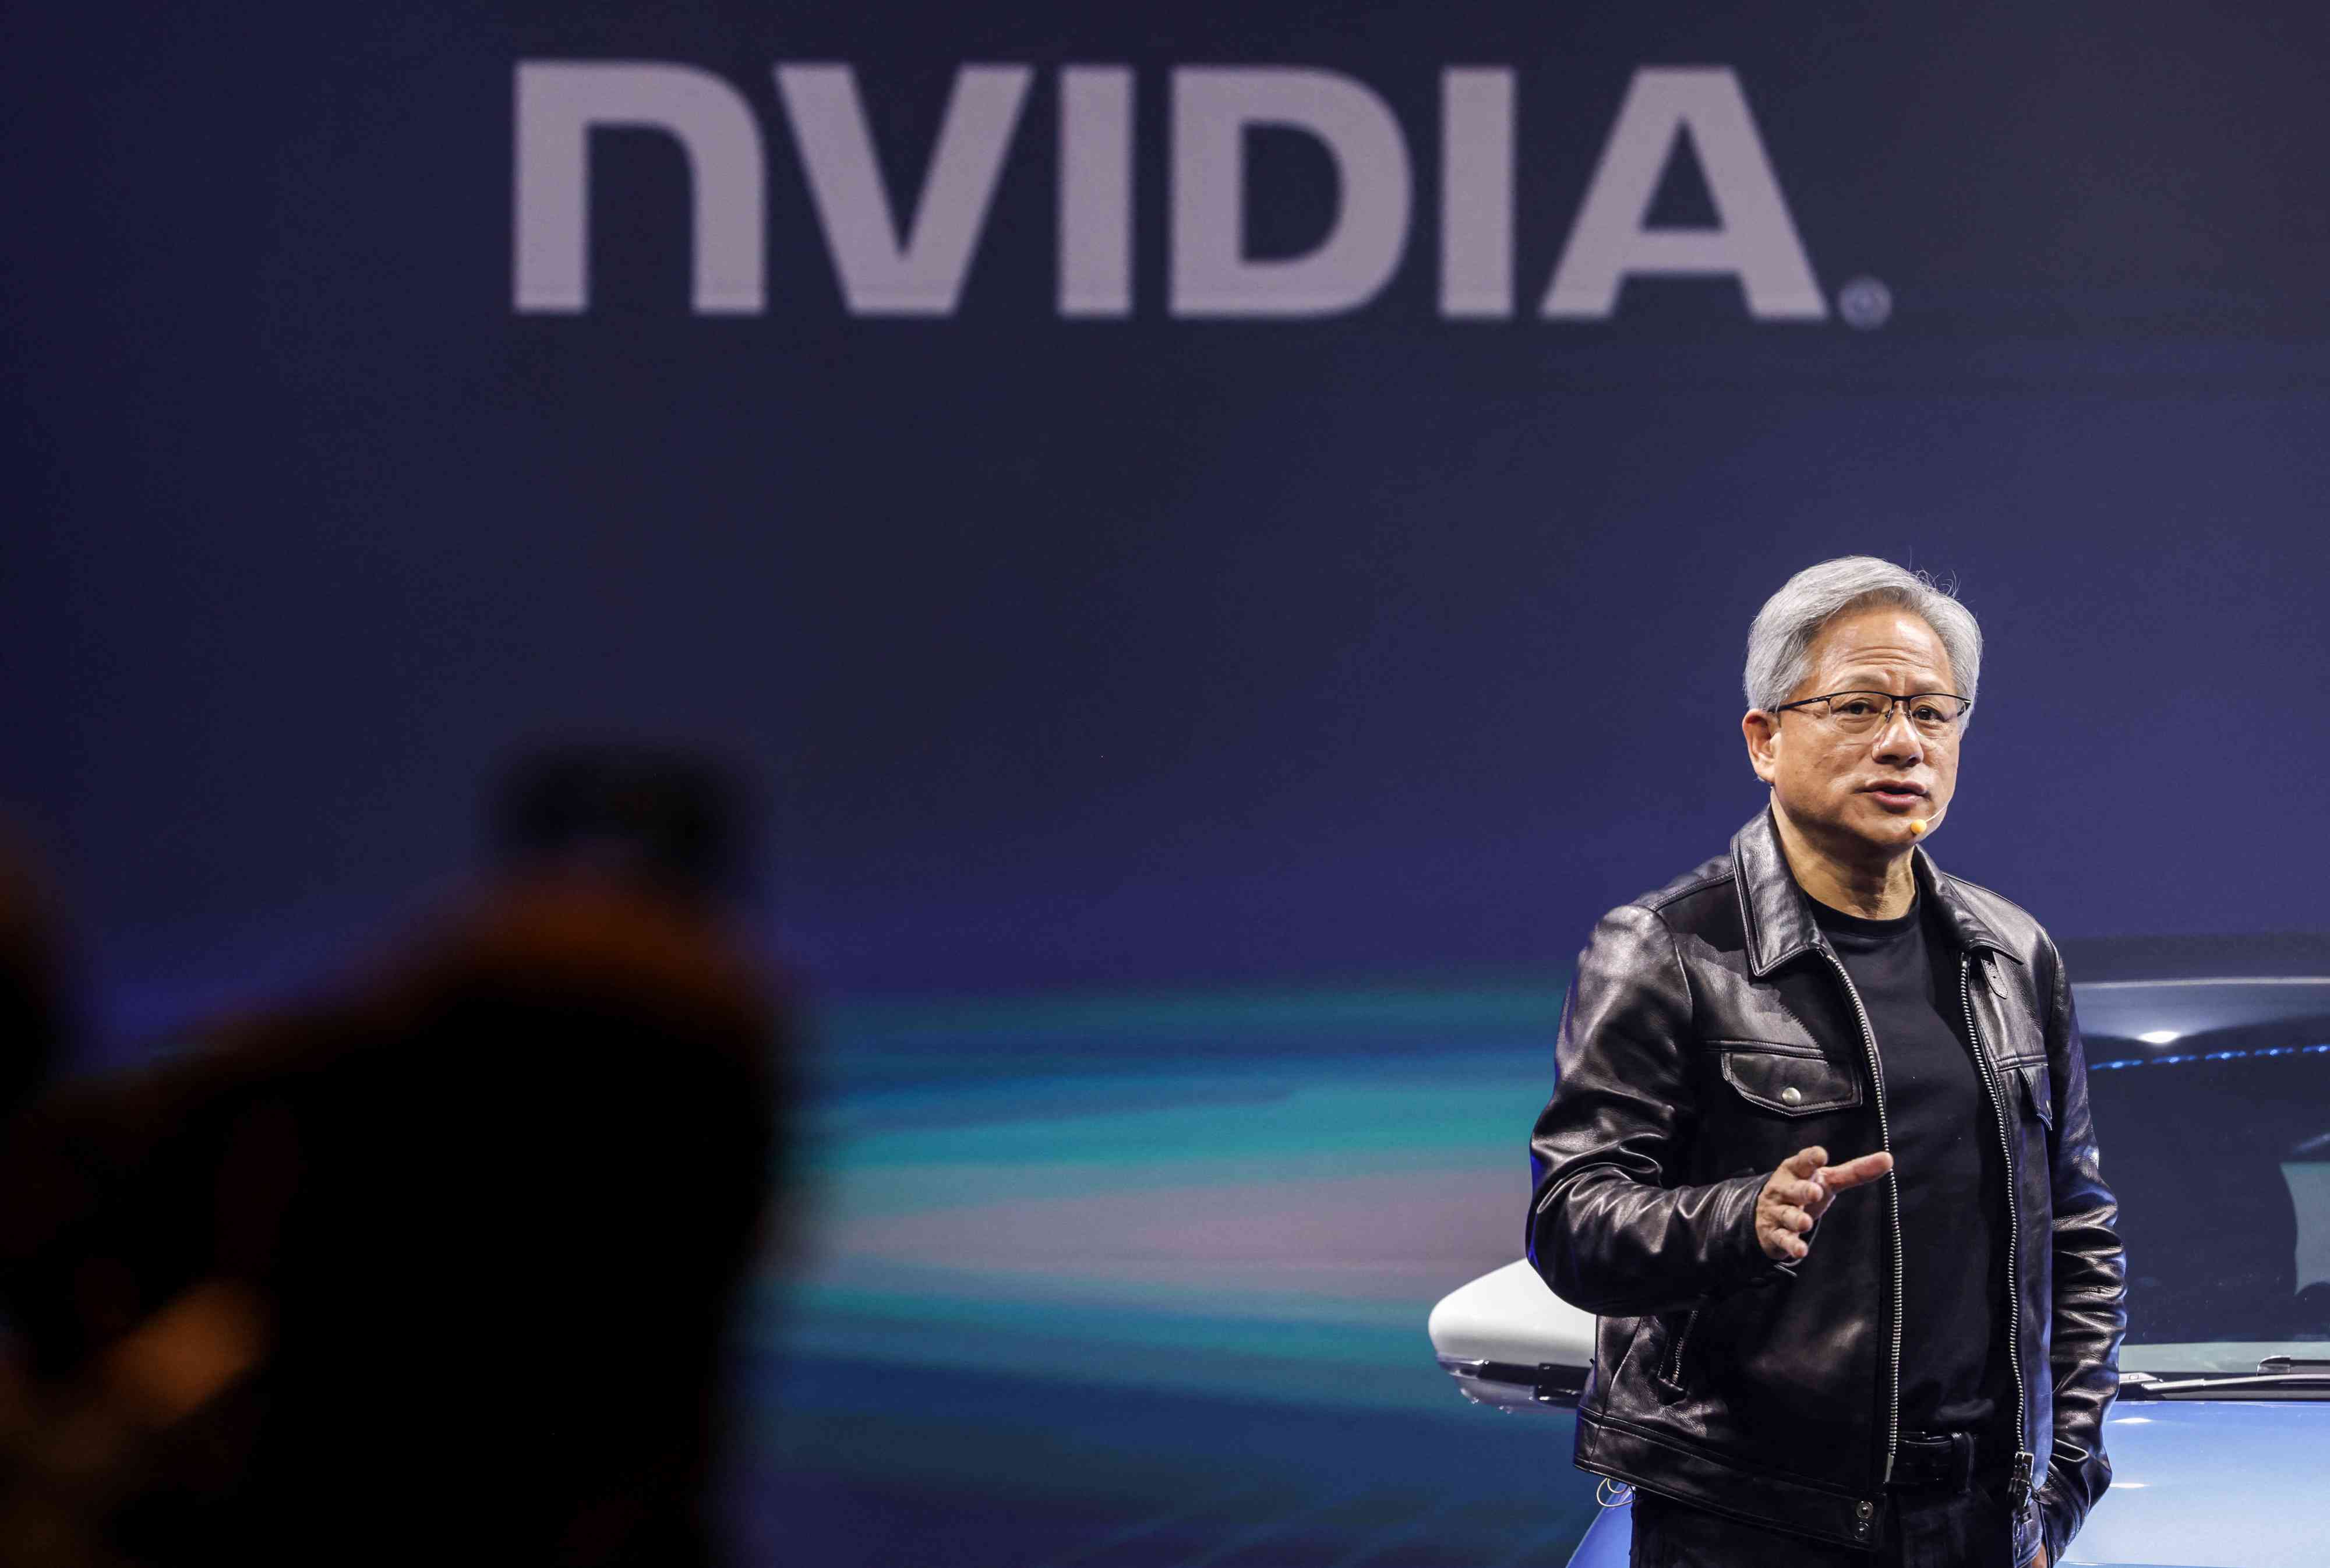 Jensen Huang, co-founder and chief executive officer of Nvidia Corp., speaks at an event